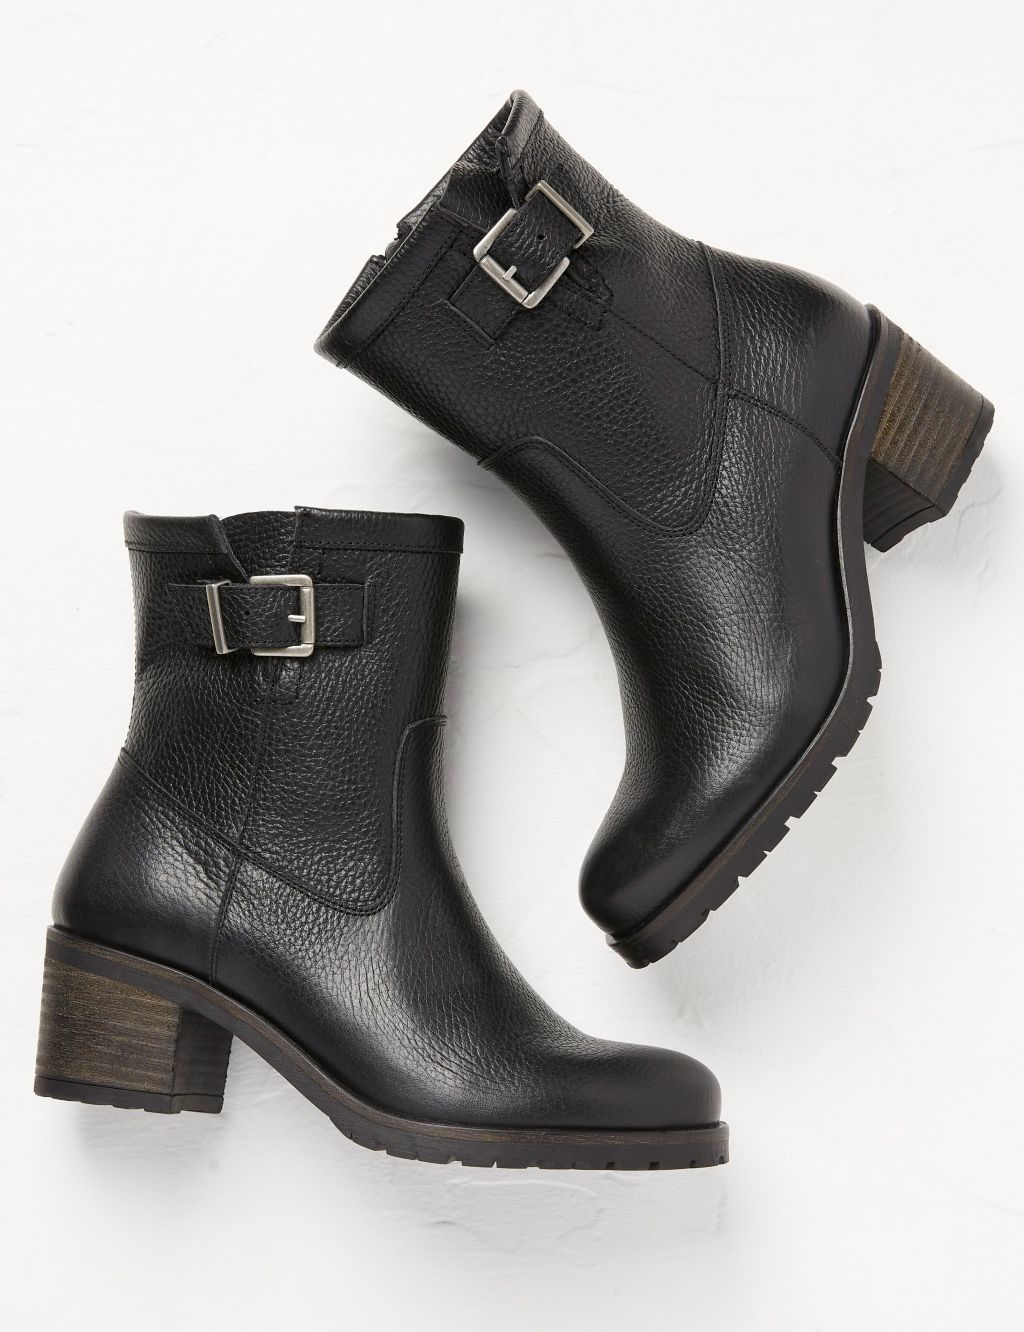 Leather Buckle Block Heel Ankle Boots image 3